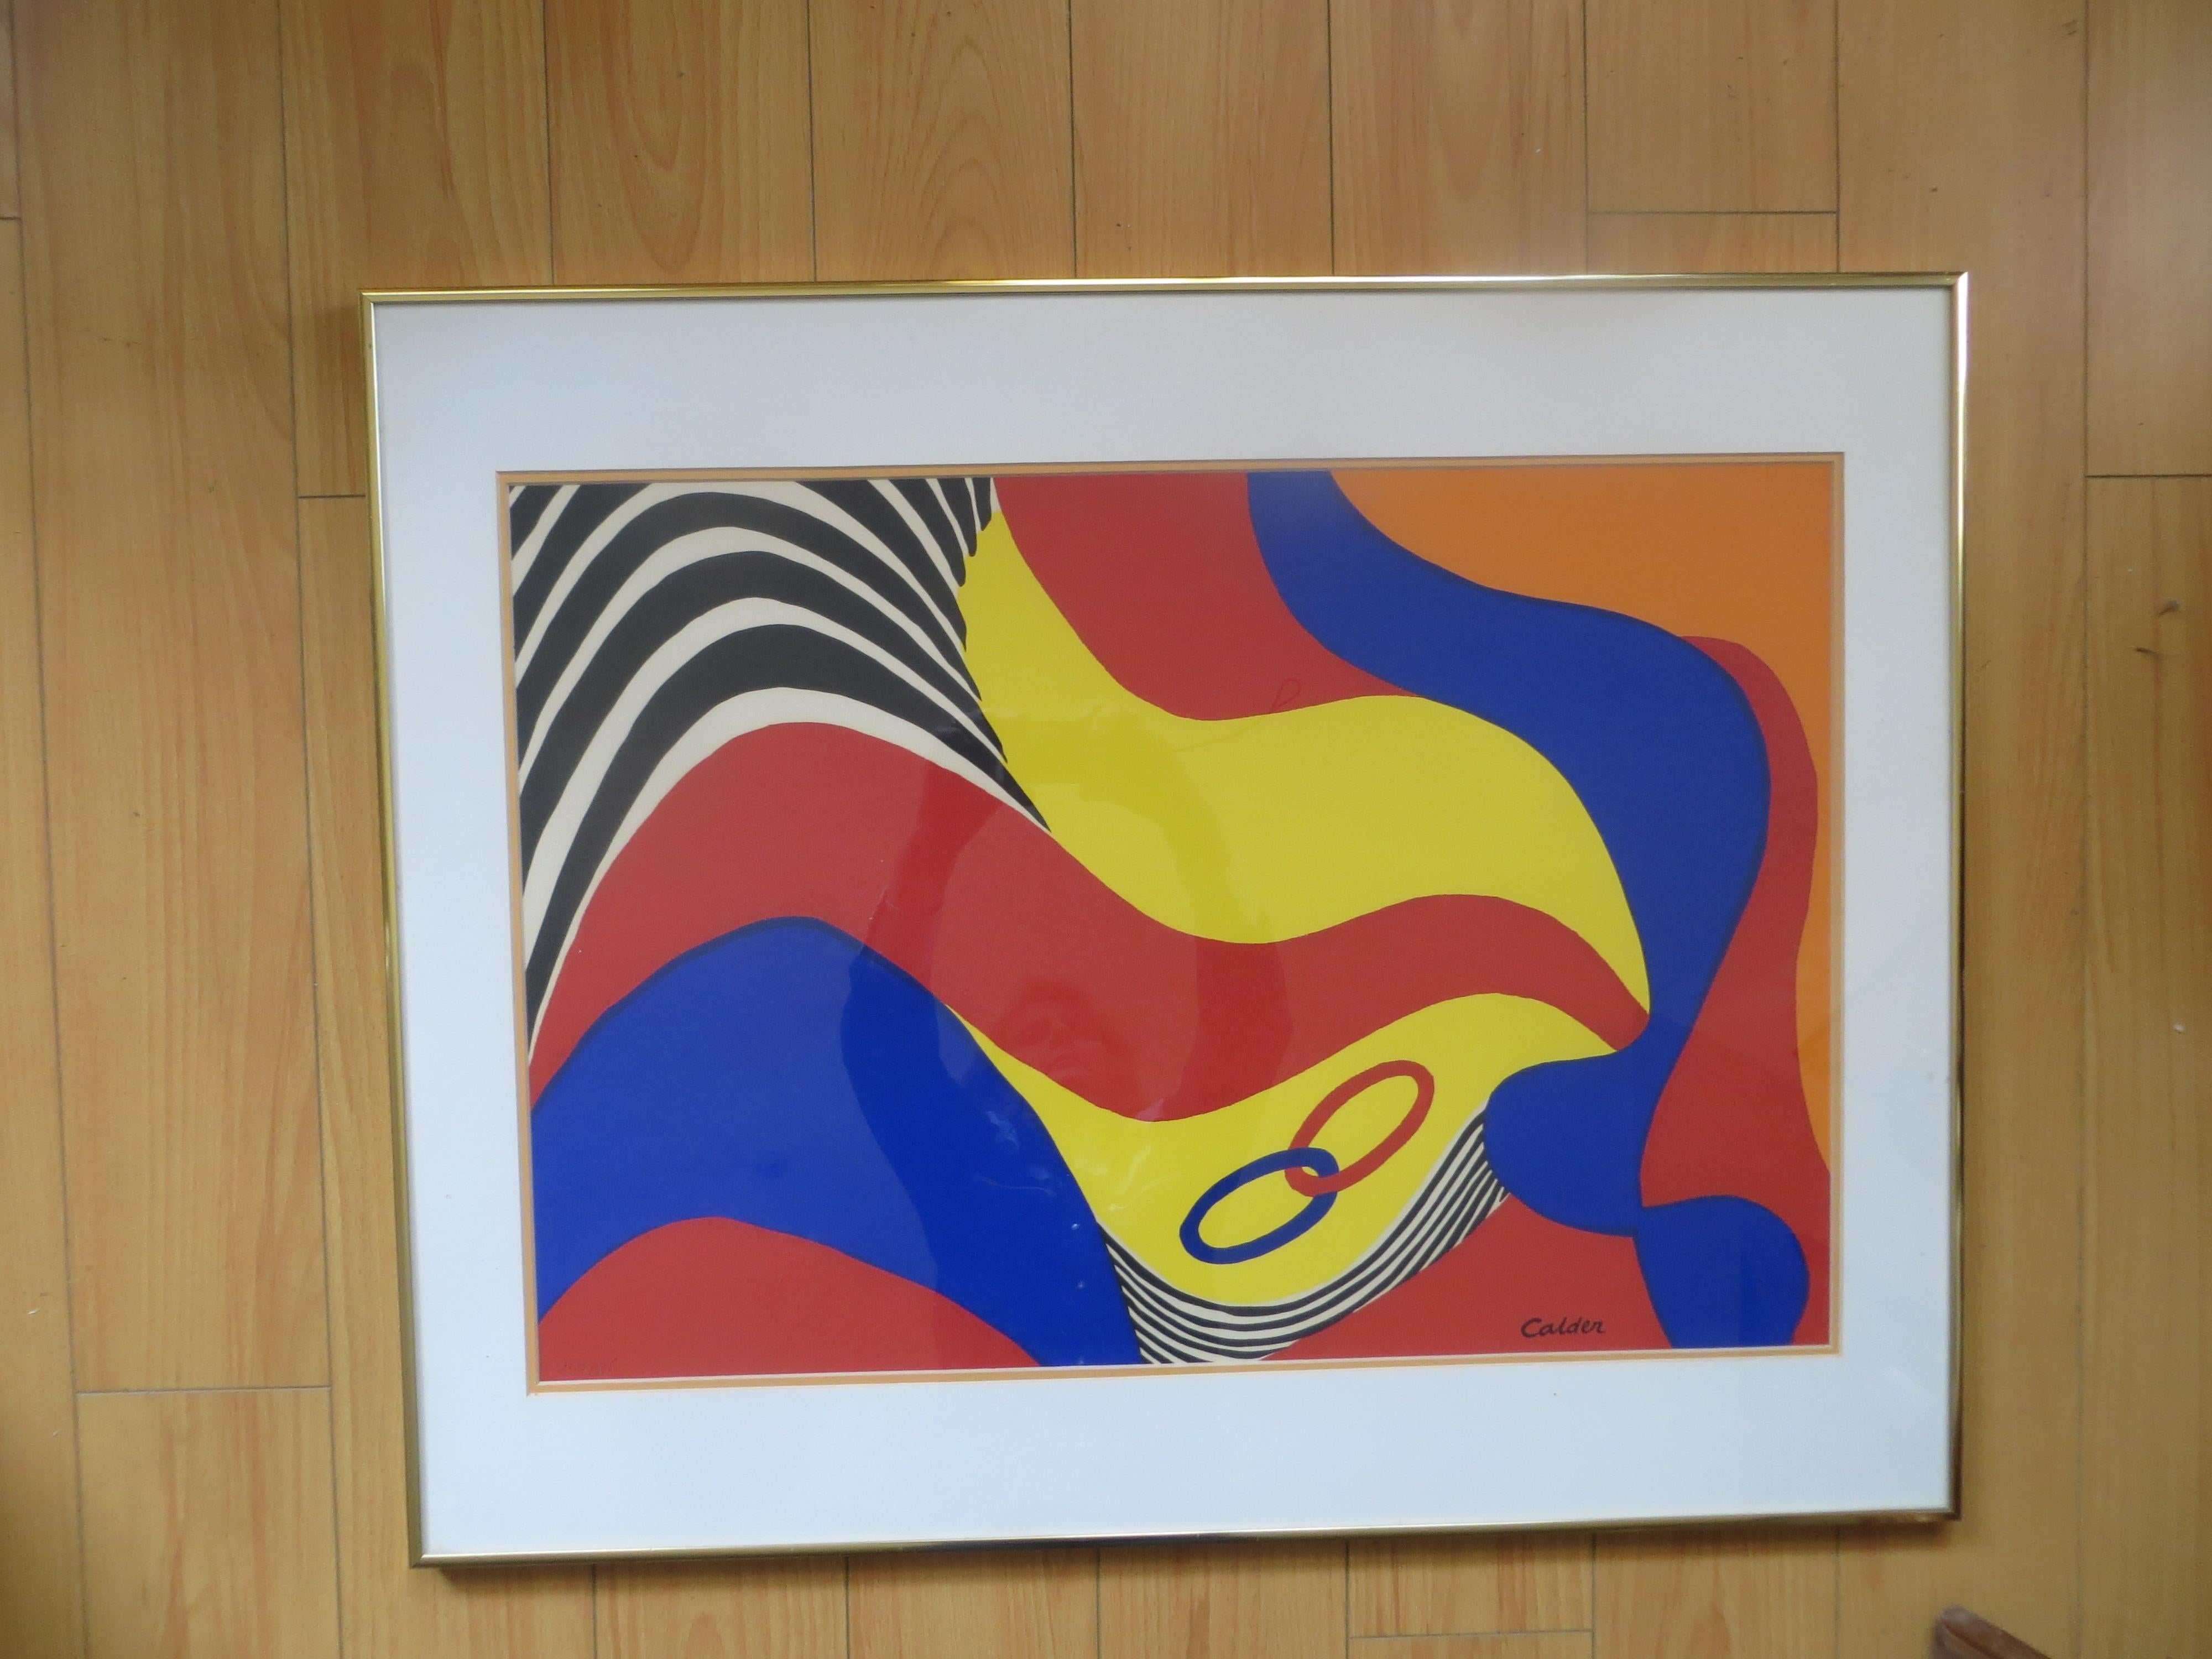  CalderAbstract lithograph Flying colors 1975 limited Edition  - Print by Alexander Calder